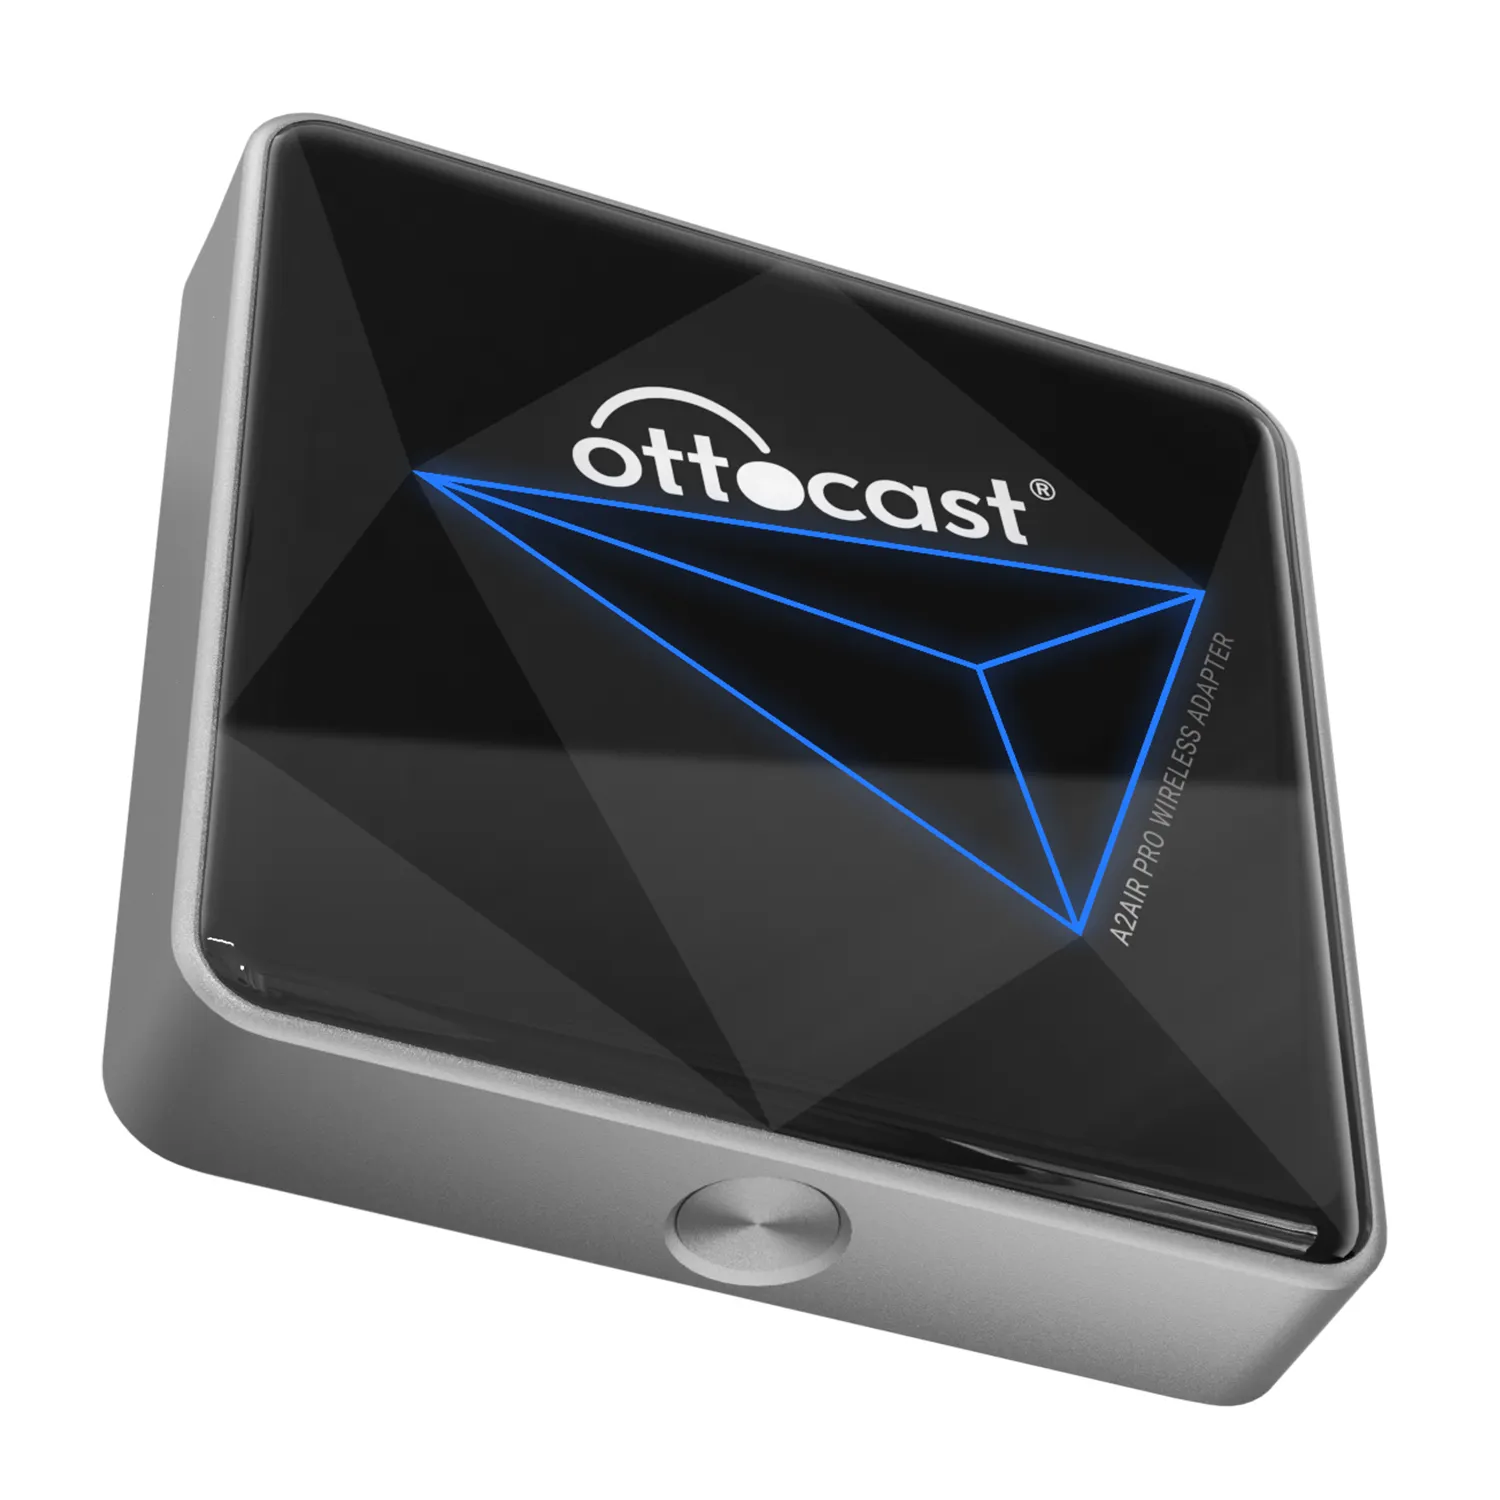 Ottocast Draadloze Plug And Play Android Auto Dongle Draagbare Universele Snelle Verbinding Voor De Auto 'S Met Ingebouwde Android Auto